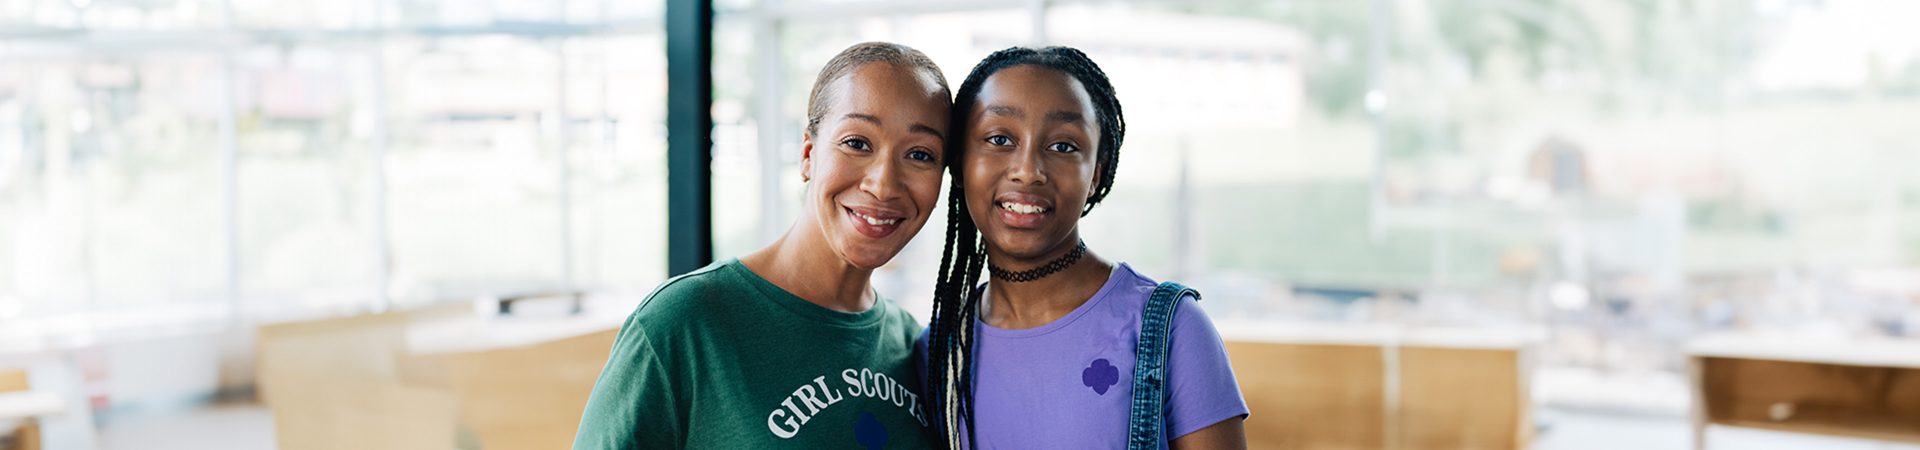  A volunteer and Girl Scout smiling at the camera 